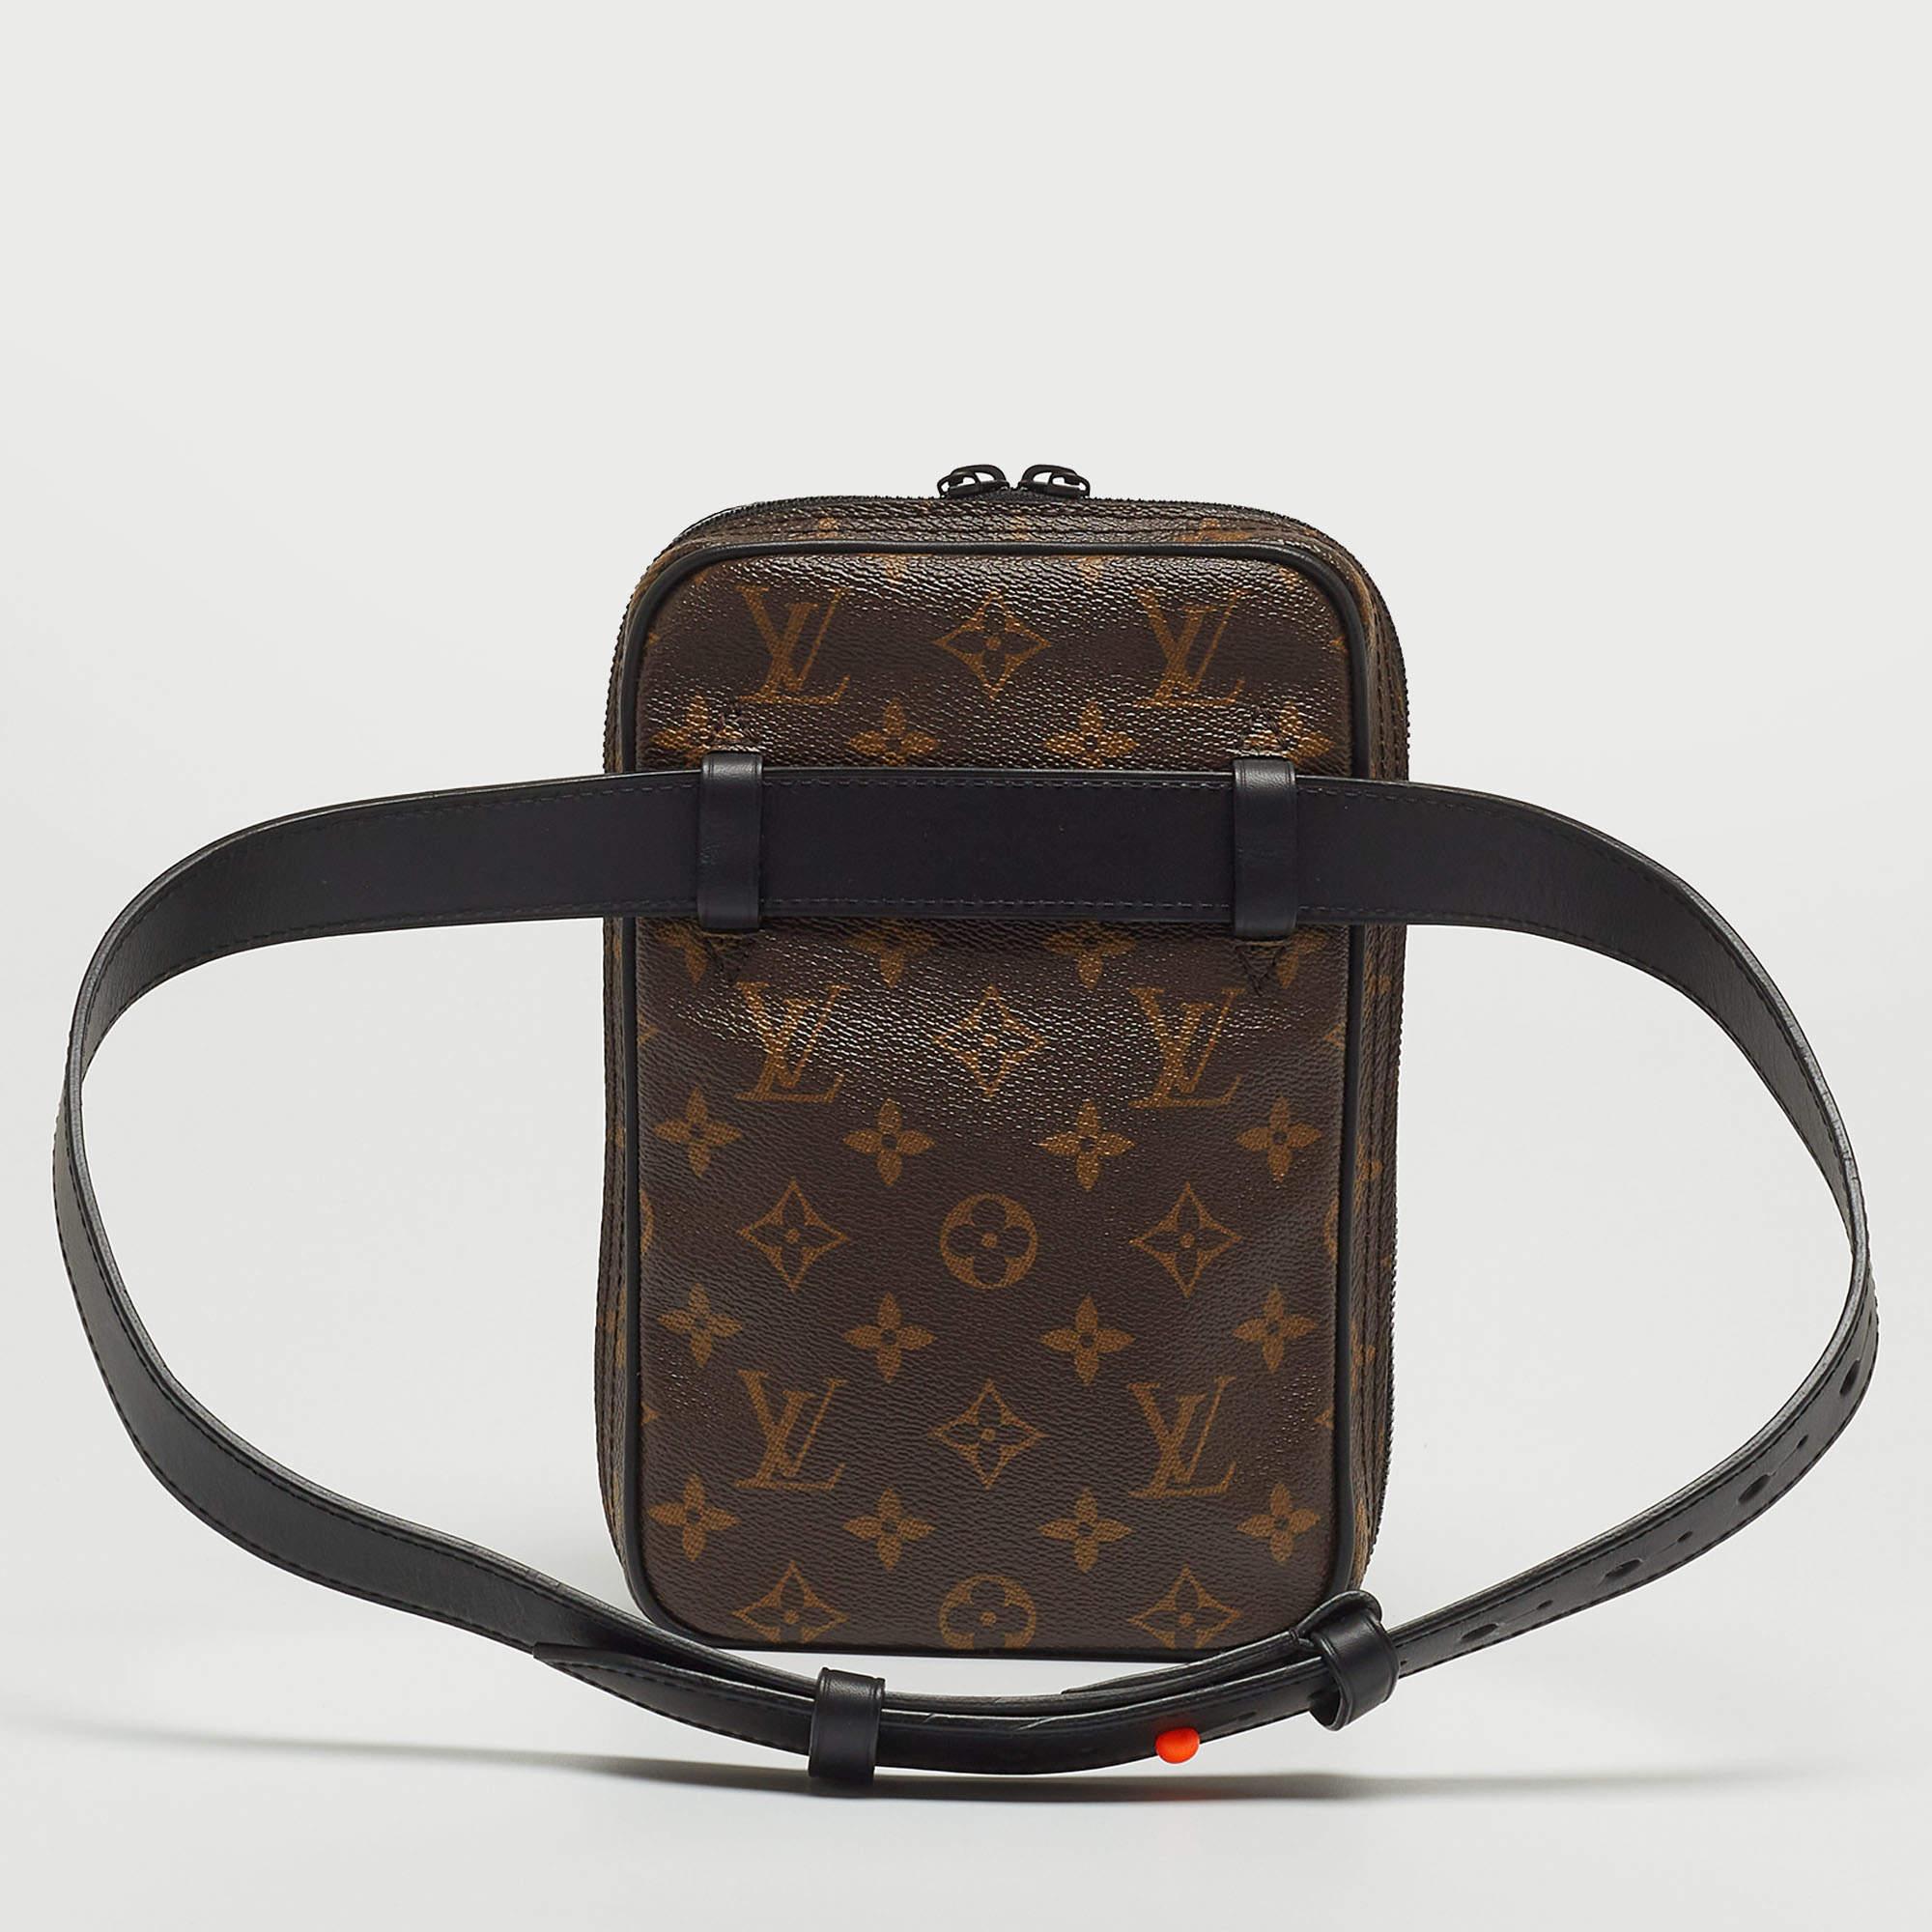 Louis Vuitton's handbags are popular owing to their high style and functionality. This bag, like all their designs, is durable and stylish. Exuding a fine finish, the bag is designed to give a luxurious experience.

Includes: Original Dustbag

